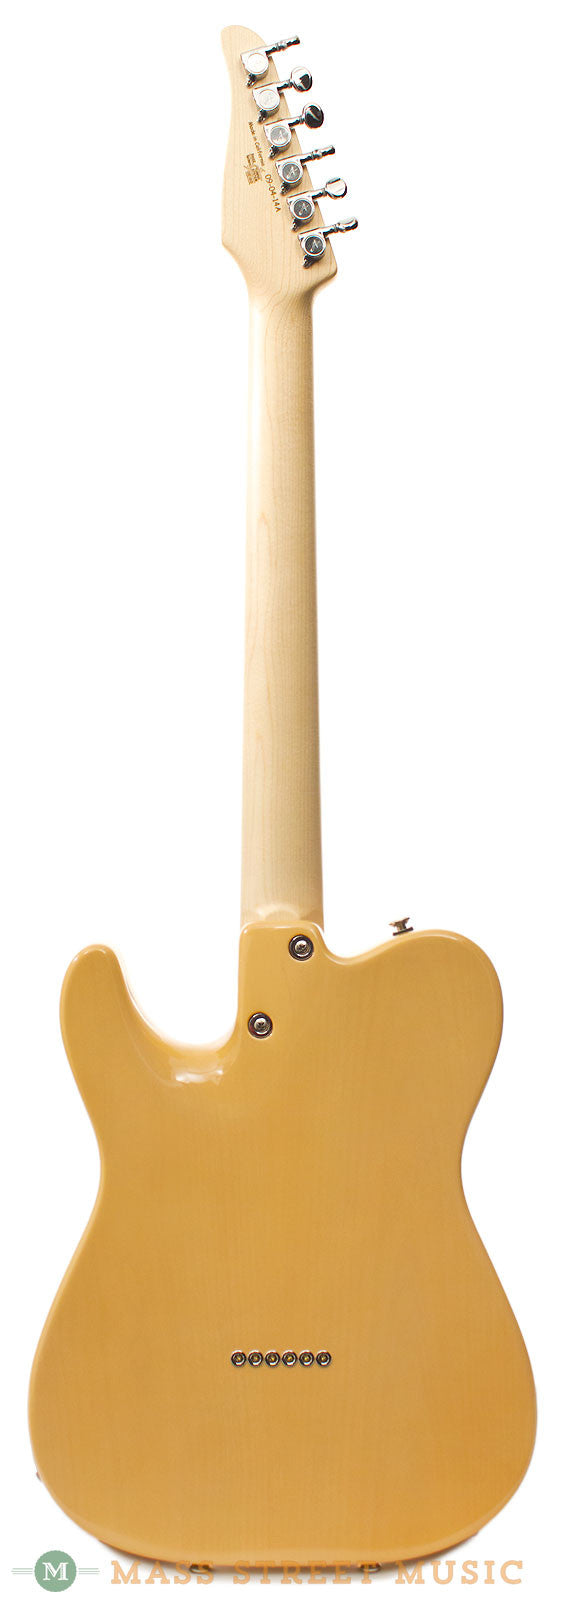 Tom Anderson Electric Guitars - Hollow T Classic - Butterscotch